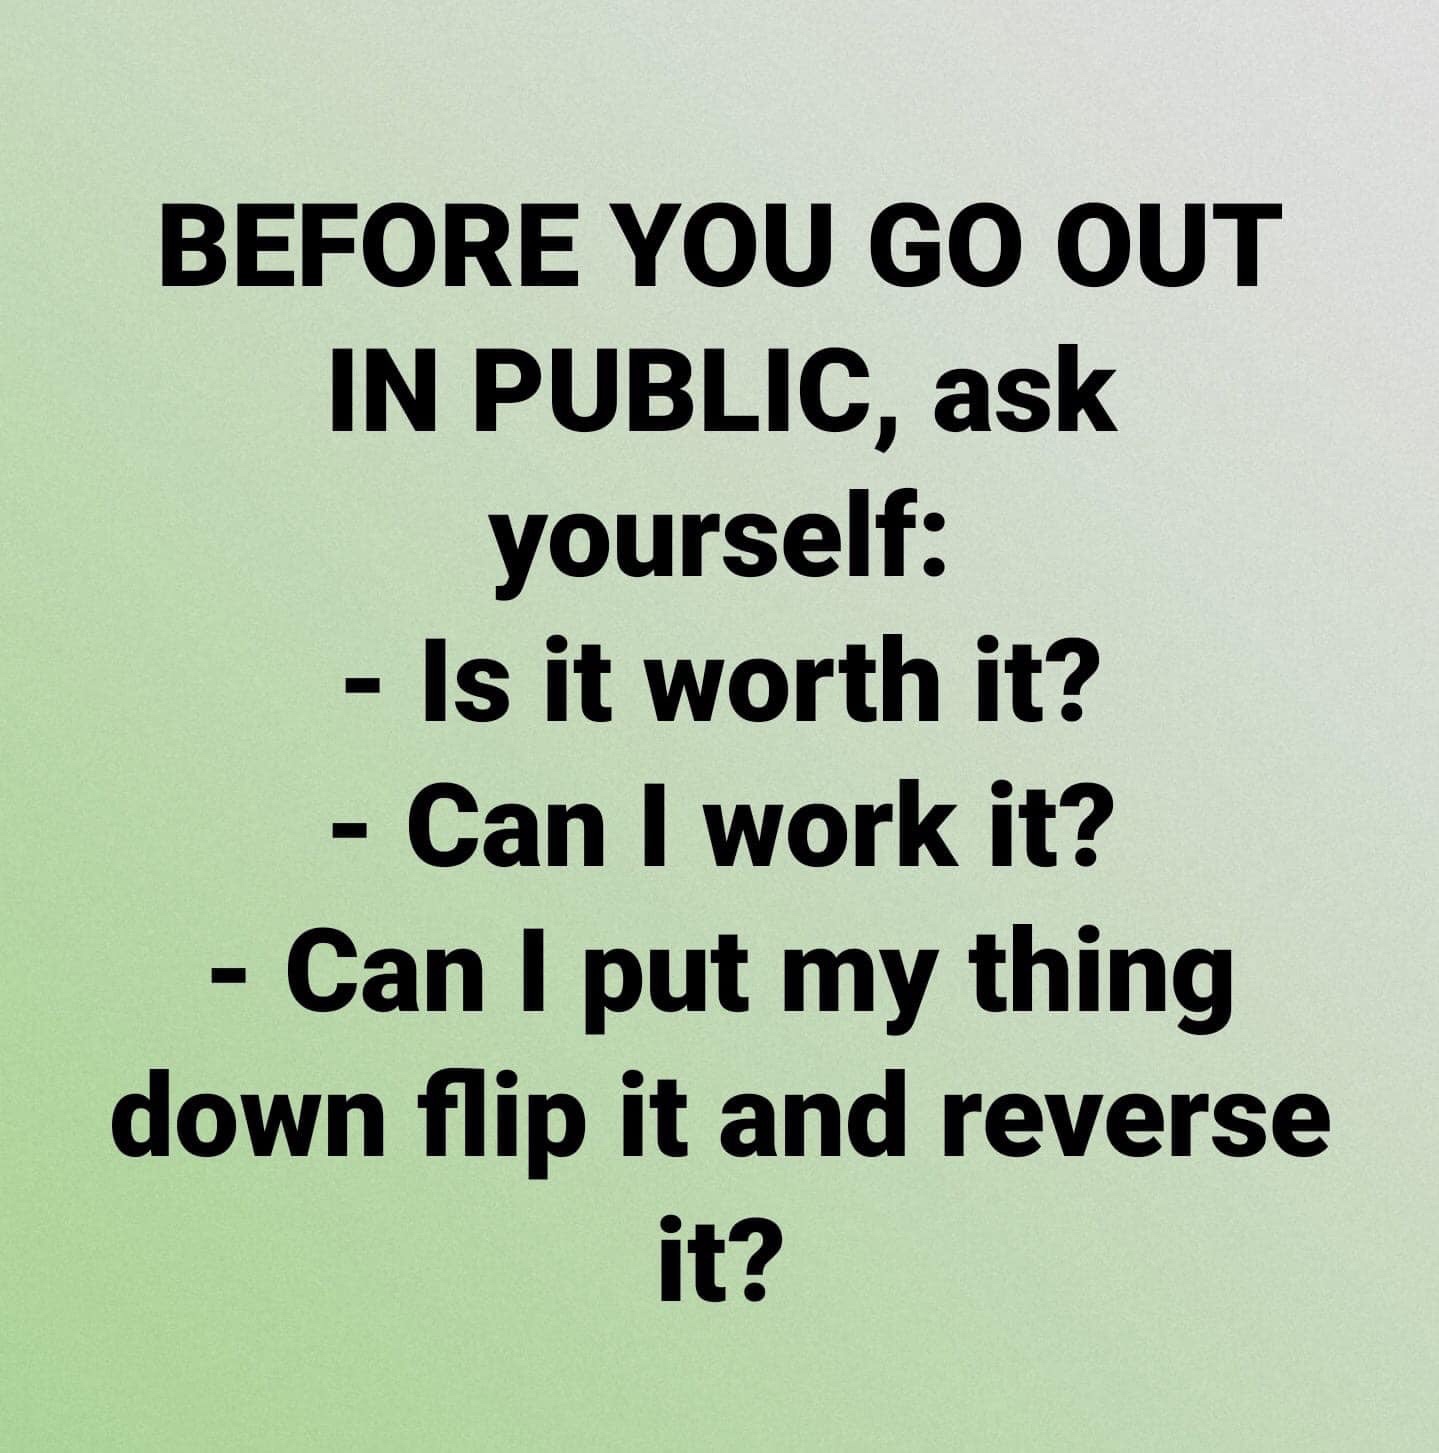 angle - Before You Go Out In Public, ask yourself Is it worth it? Can I work it? Can I put my thing down flip it and reverse it?